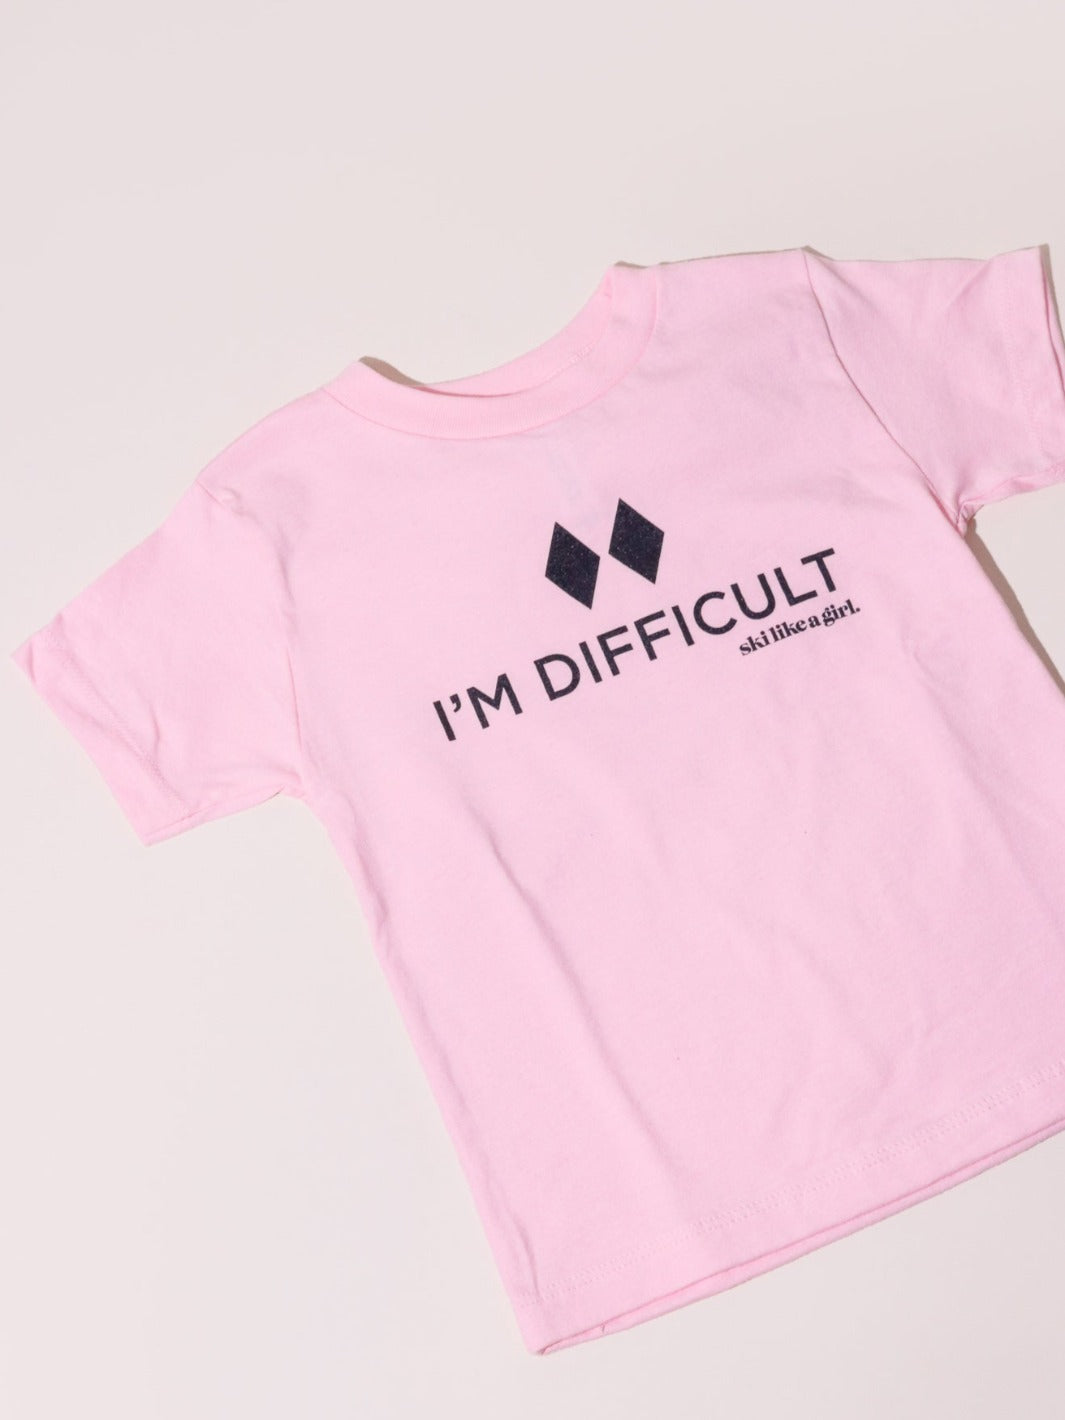 Ski Like a Girl I'm Difficult Toddler Tee - Heyday